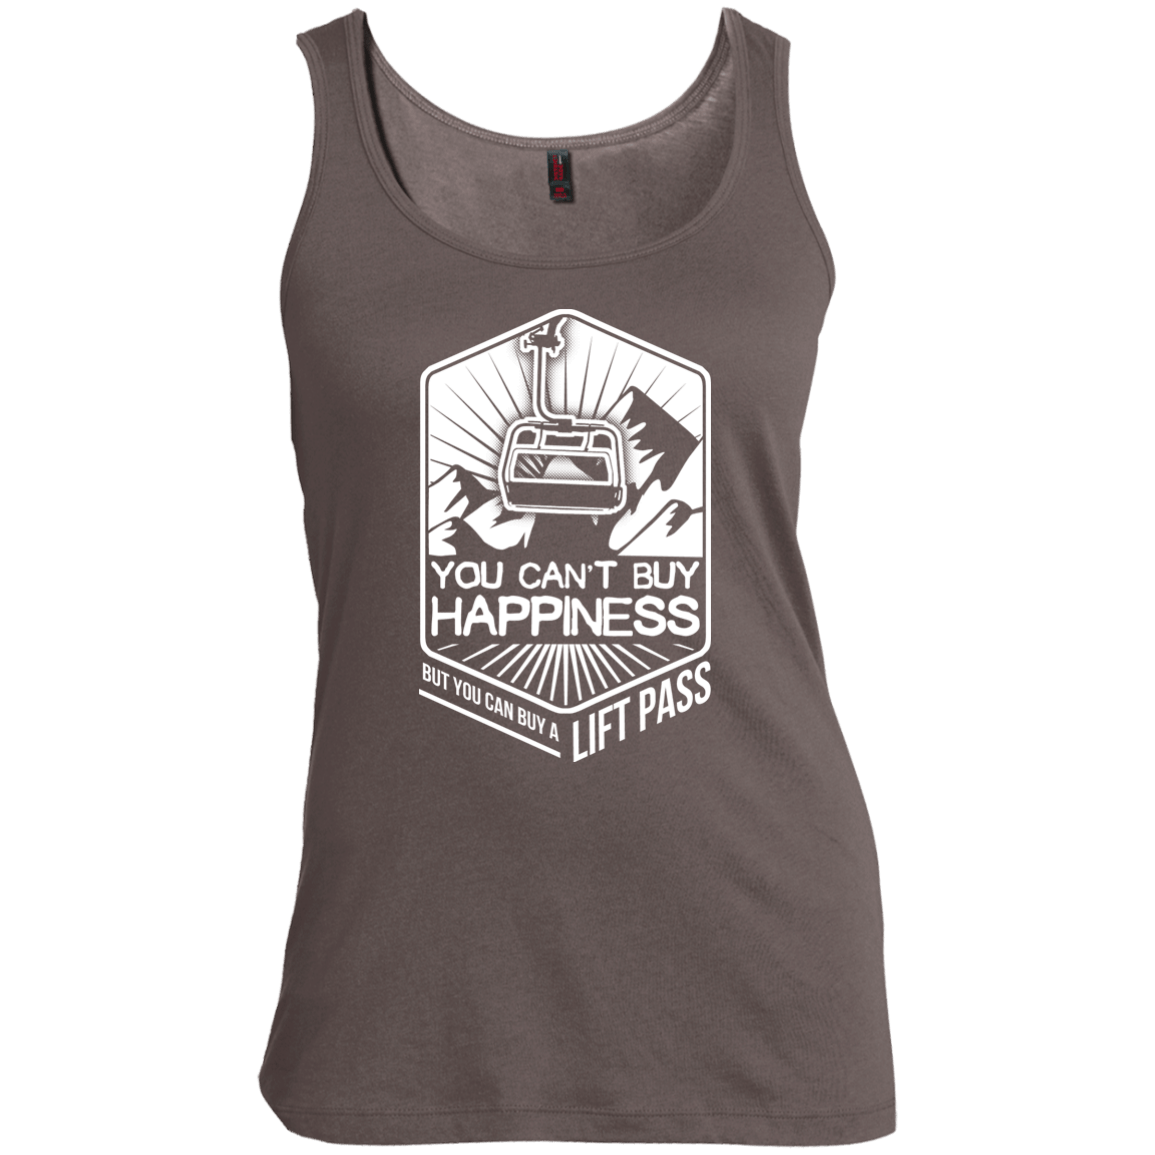 You Can't Buy Happiness But You Can Buy A Lift Pass Tank Tops - Powderaddicts